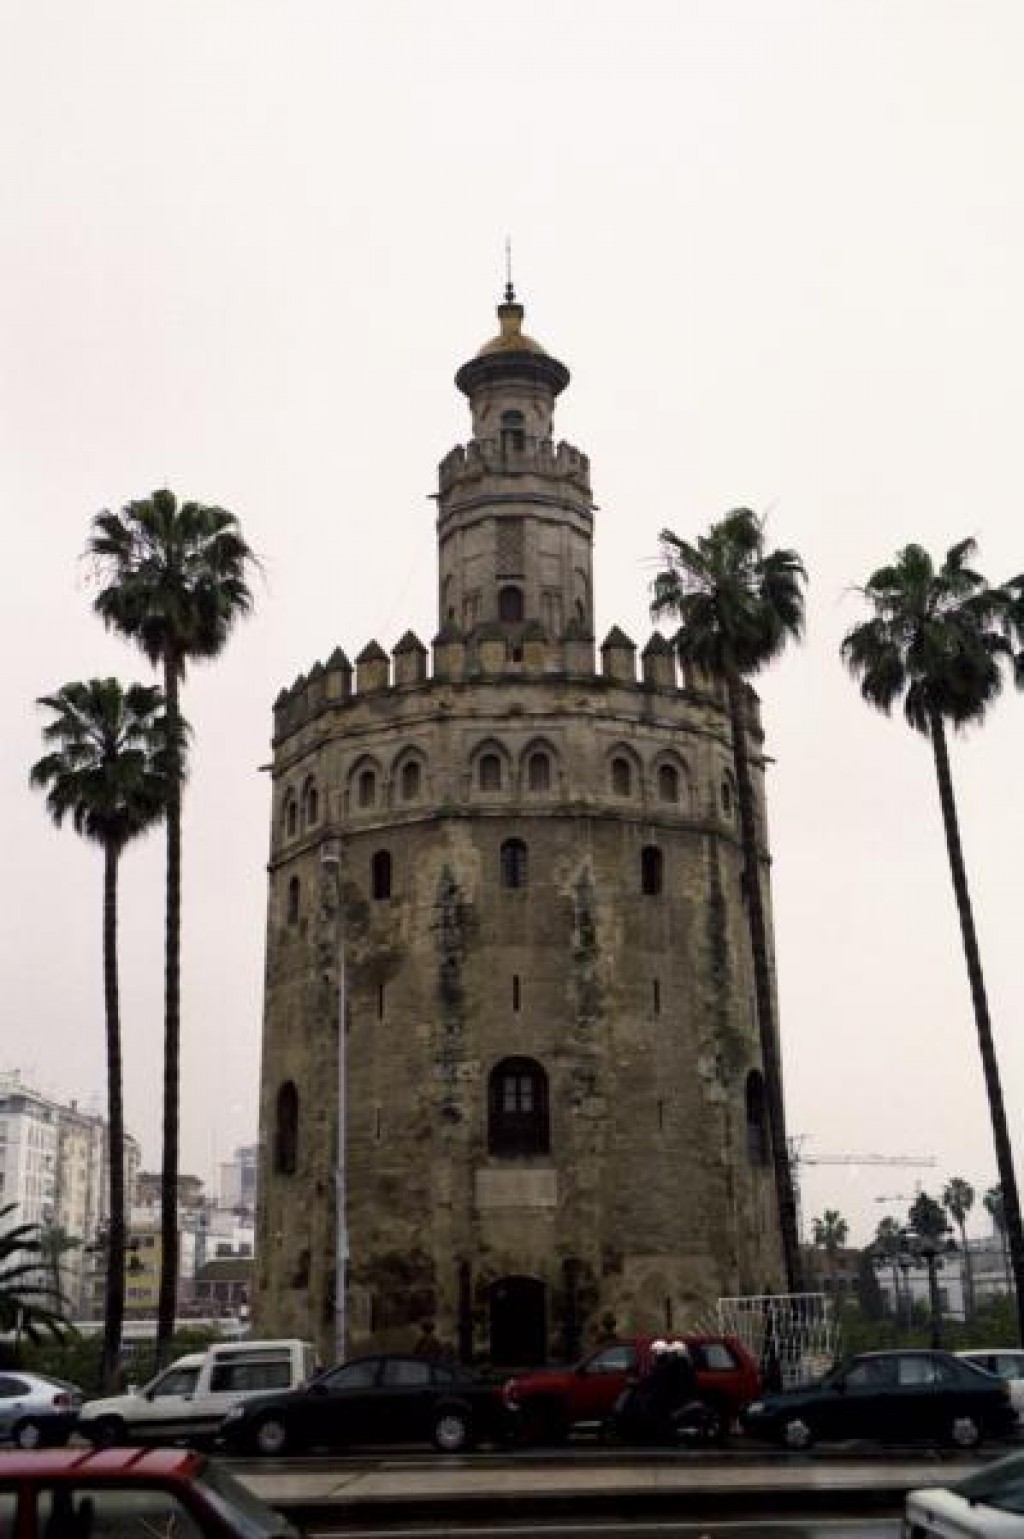 This is the Torre del Oro (Tower of Gold).  It was built in 1200, and was once covered in a glaze of golden tile.